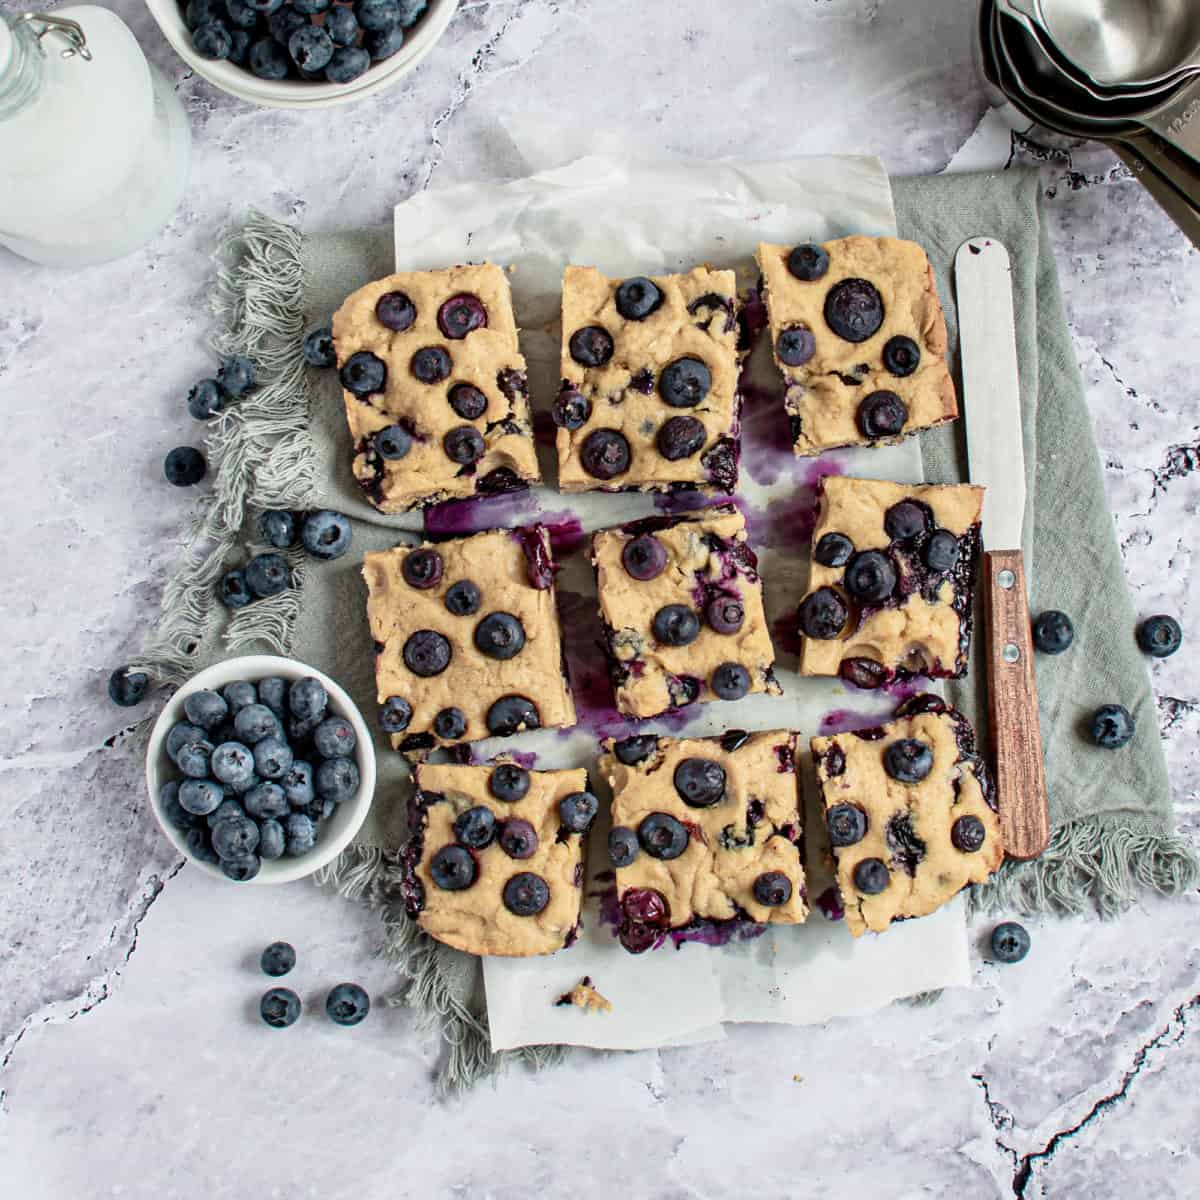 Nine blueberry blondies spread out on a table.